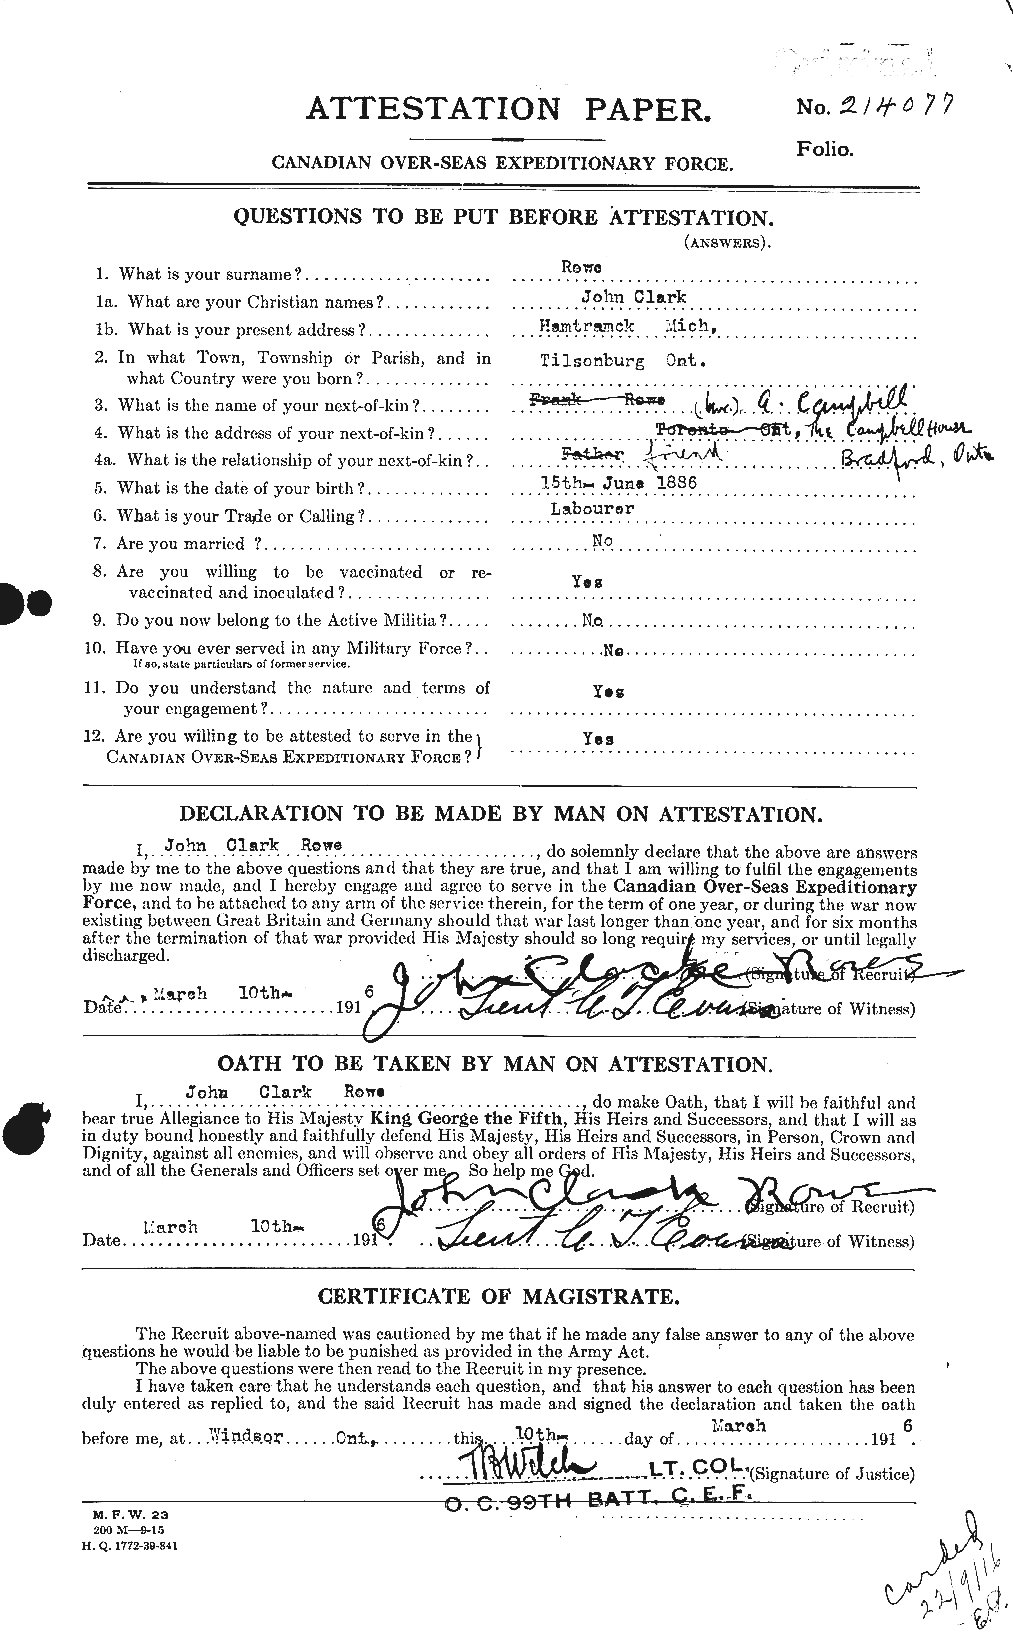 Personnel Records of the First World War - CEF 615930a